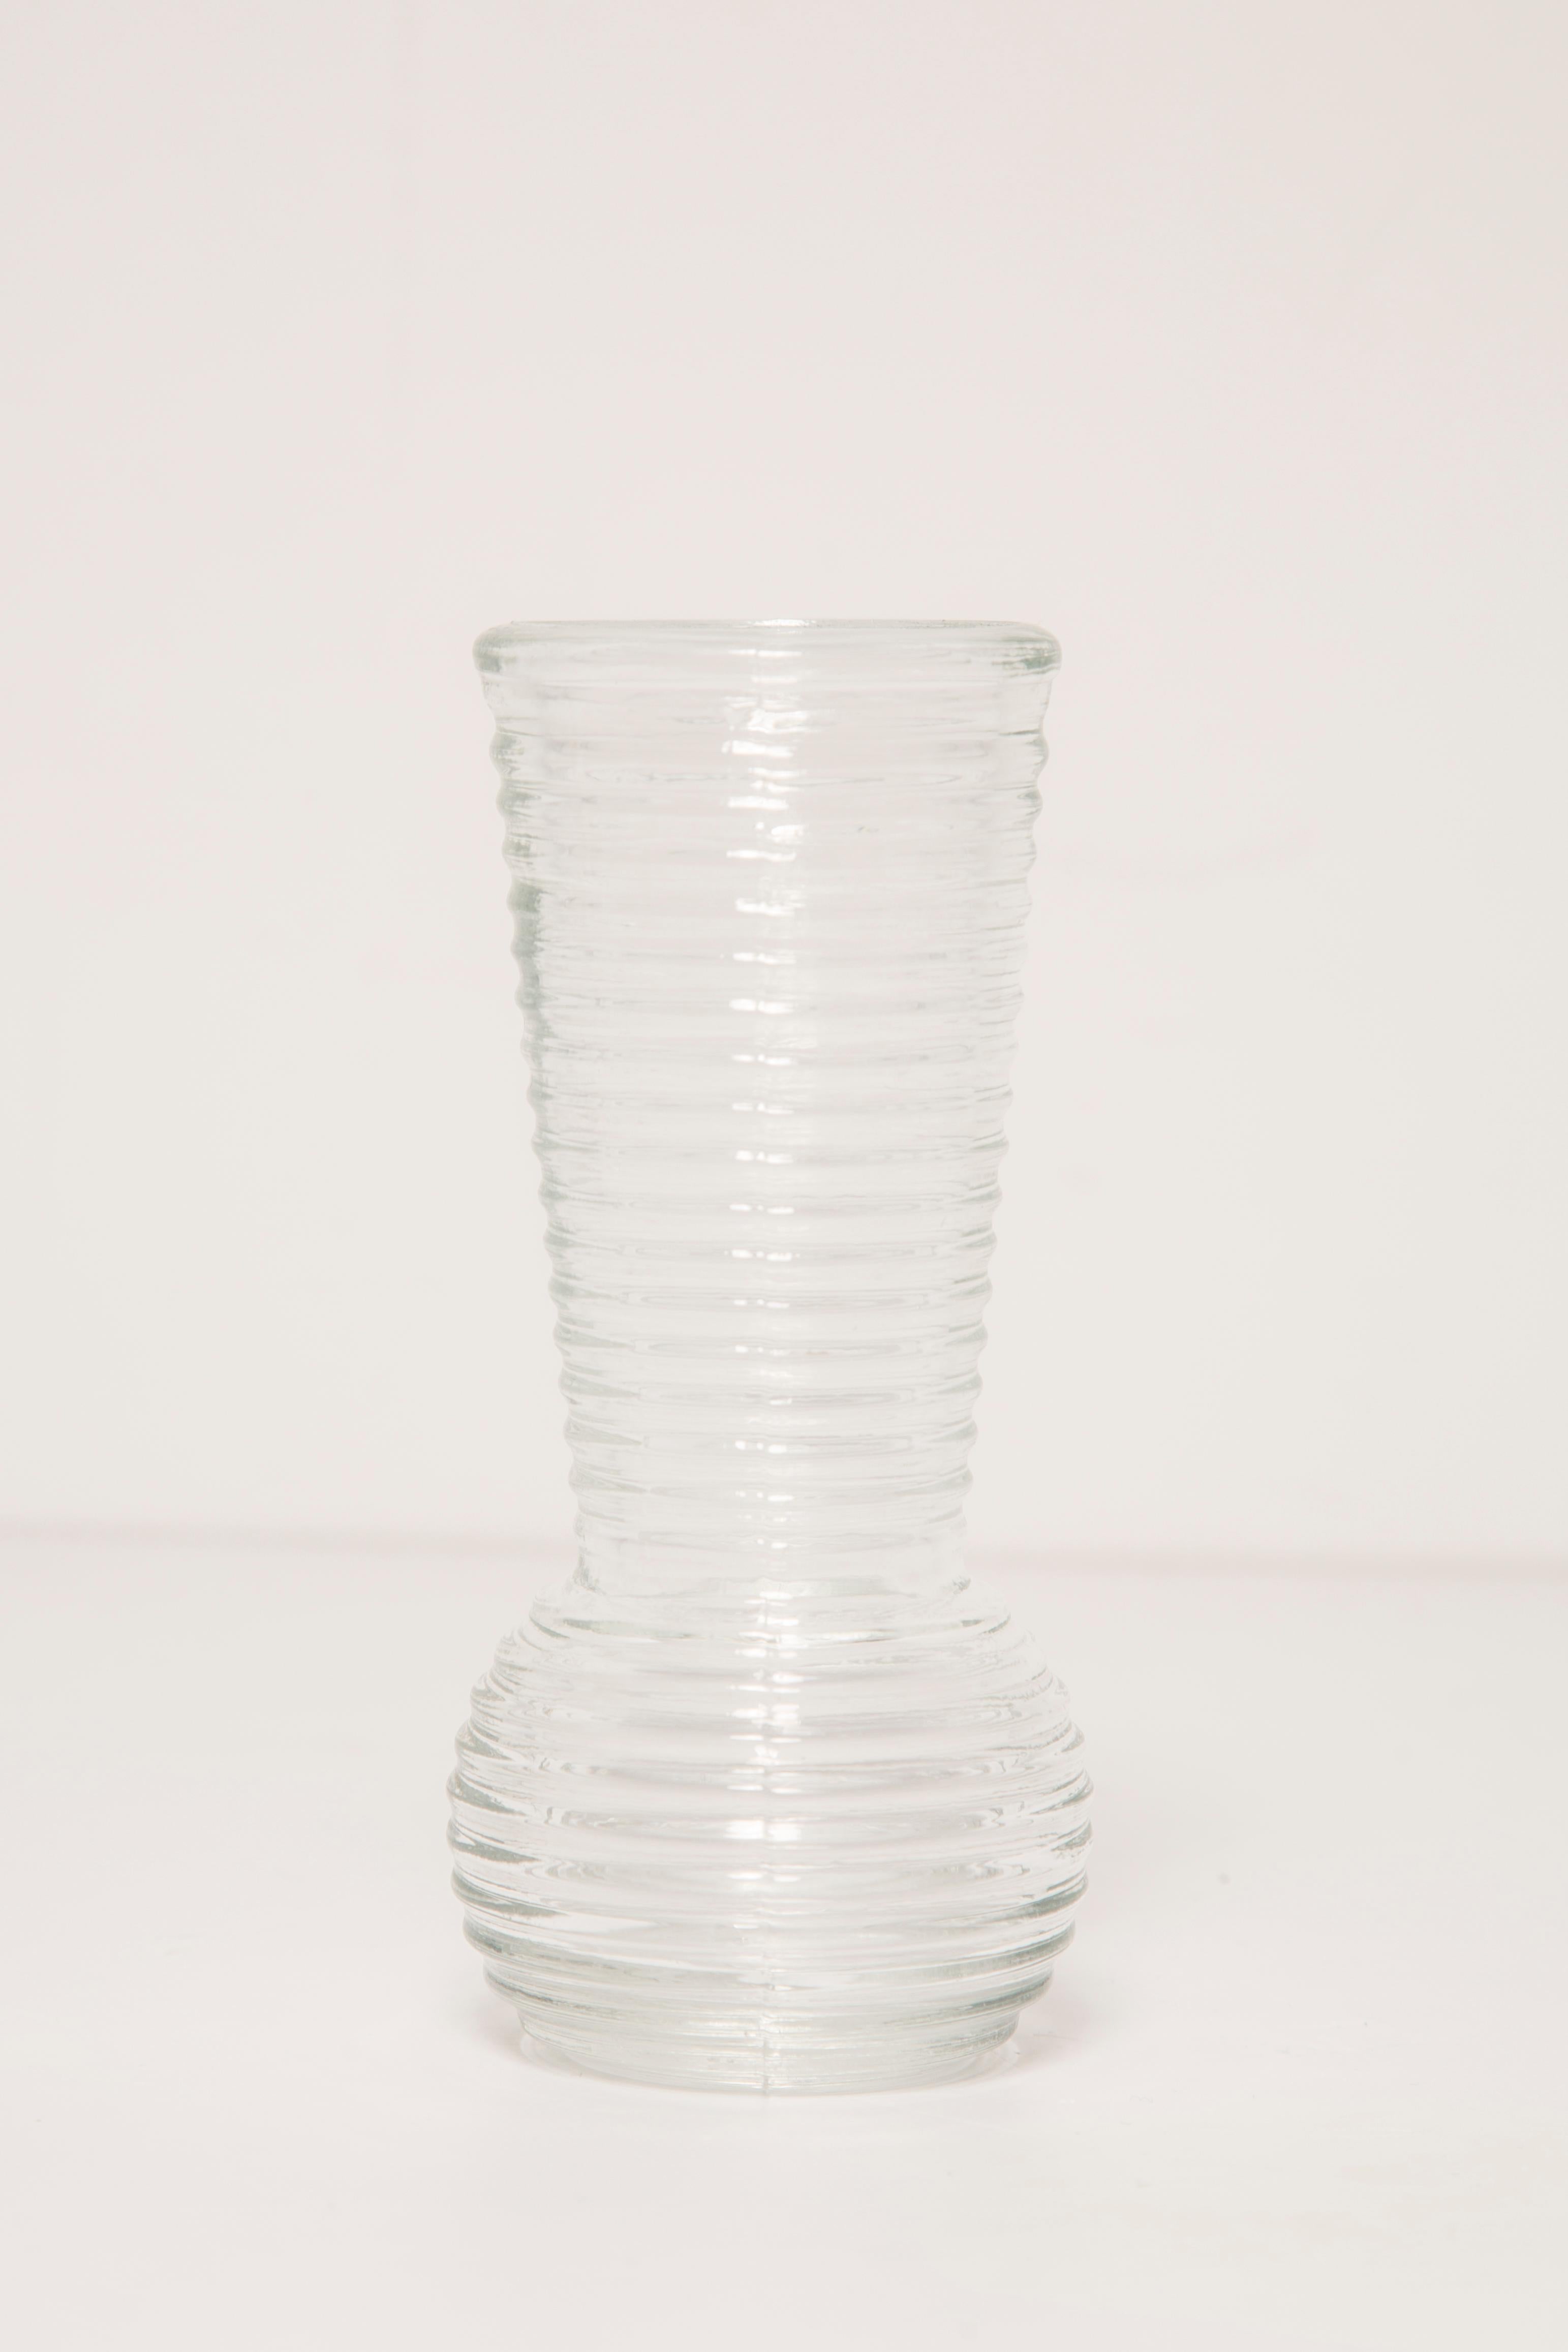 20th Century Midcentury Vintage Transparent Small Vase, Europe, 1960s For Sale